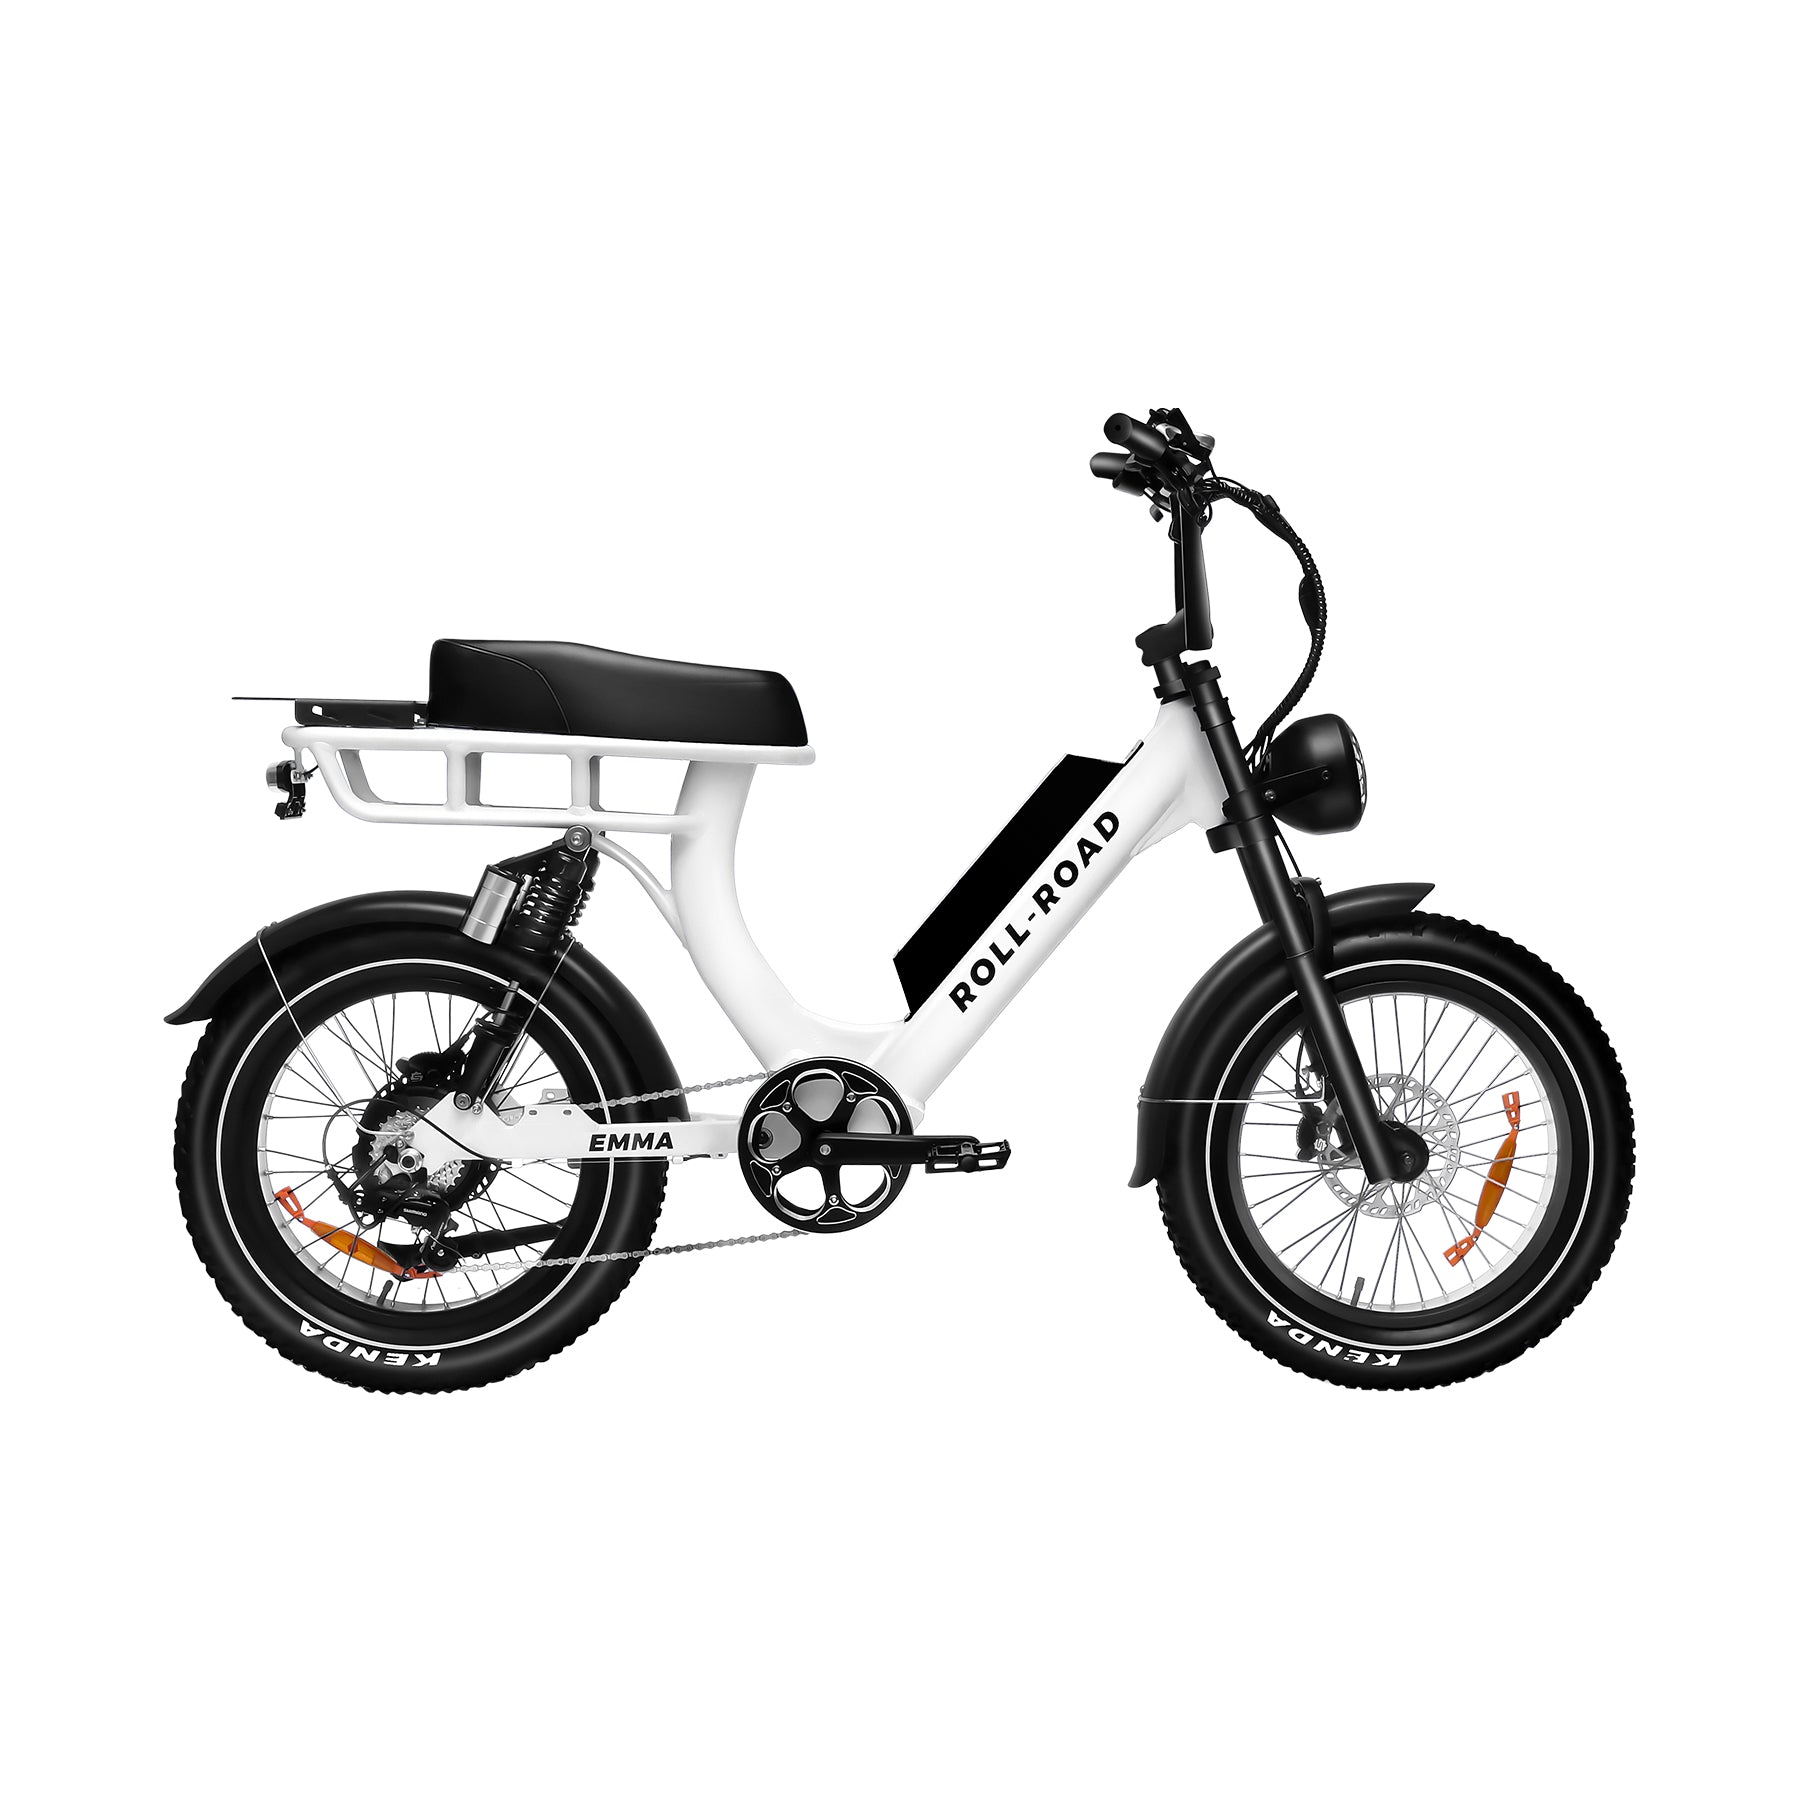 450LB Payload Moped Style Ebikes- Roll Road Emma Ebike